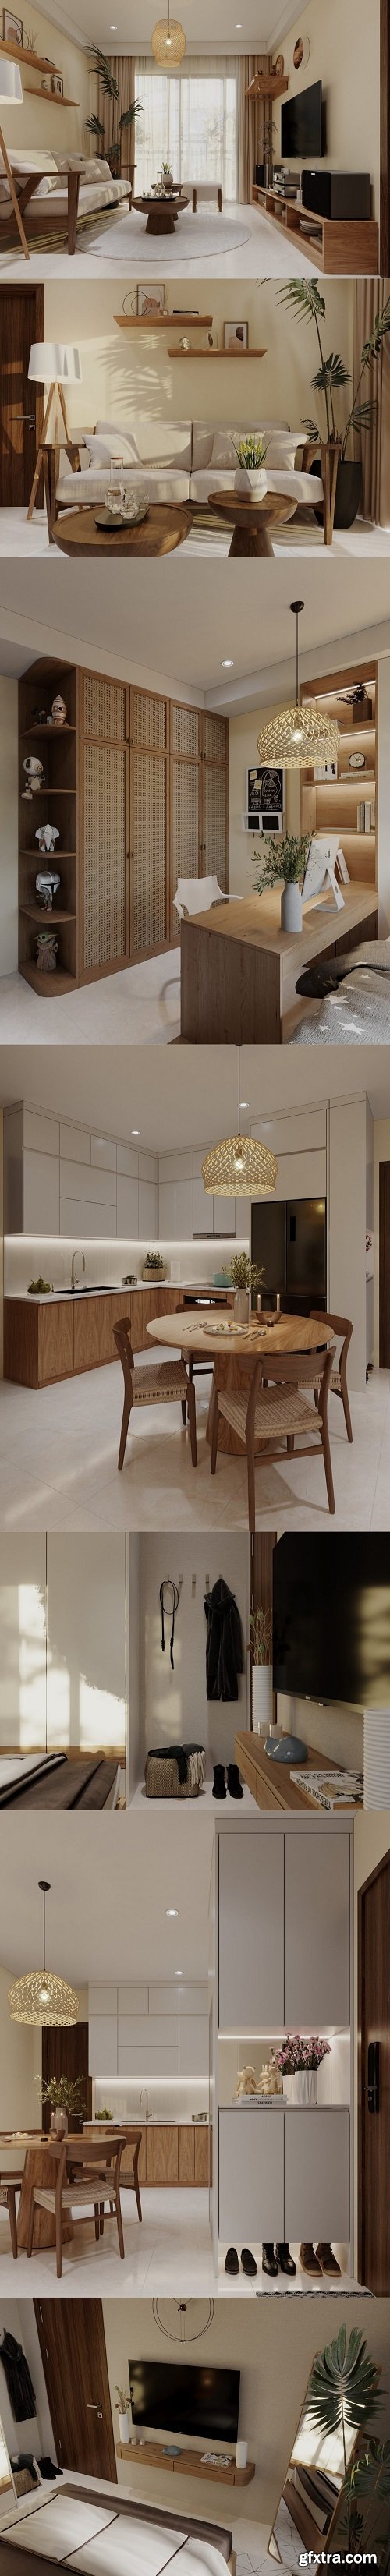 Living Room – Kitchen Interior by Nguyen Duc Anh